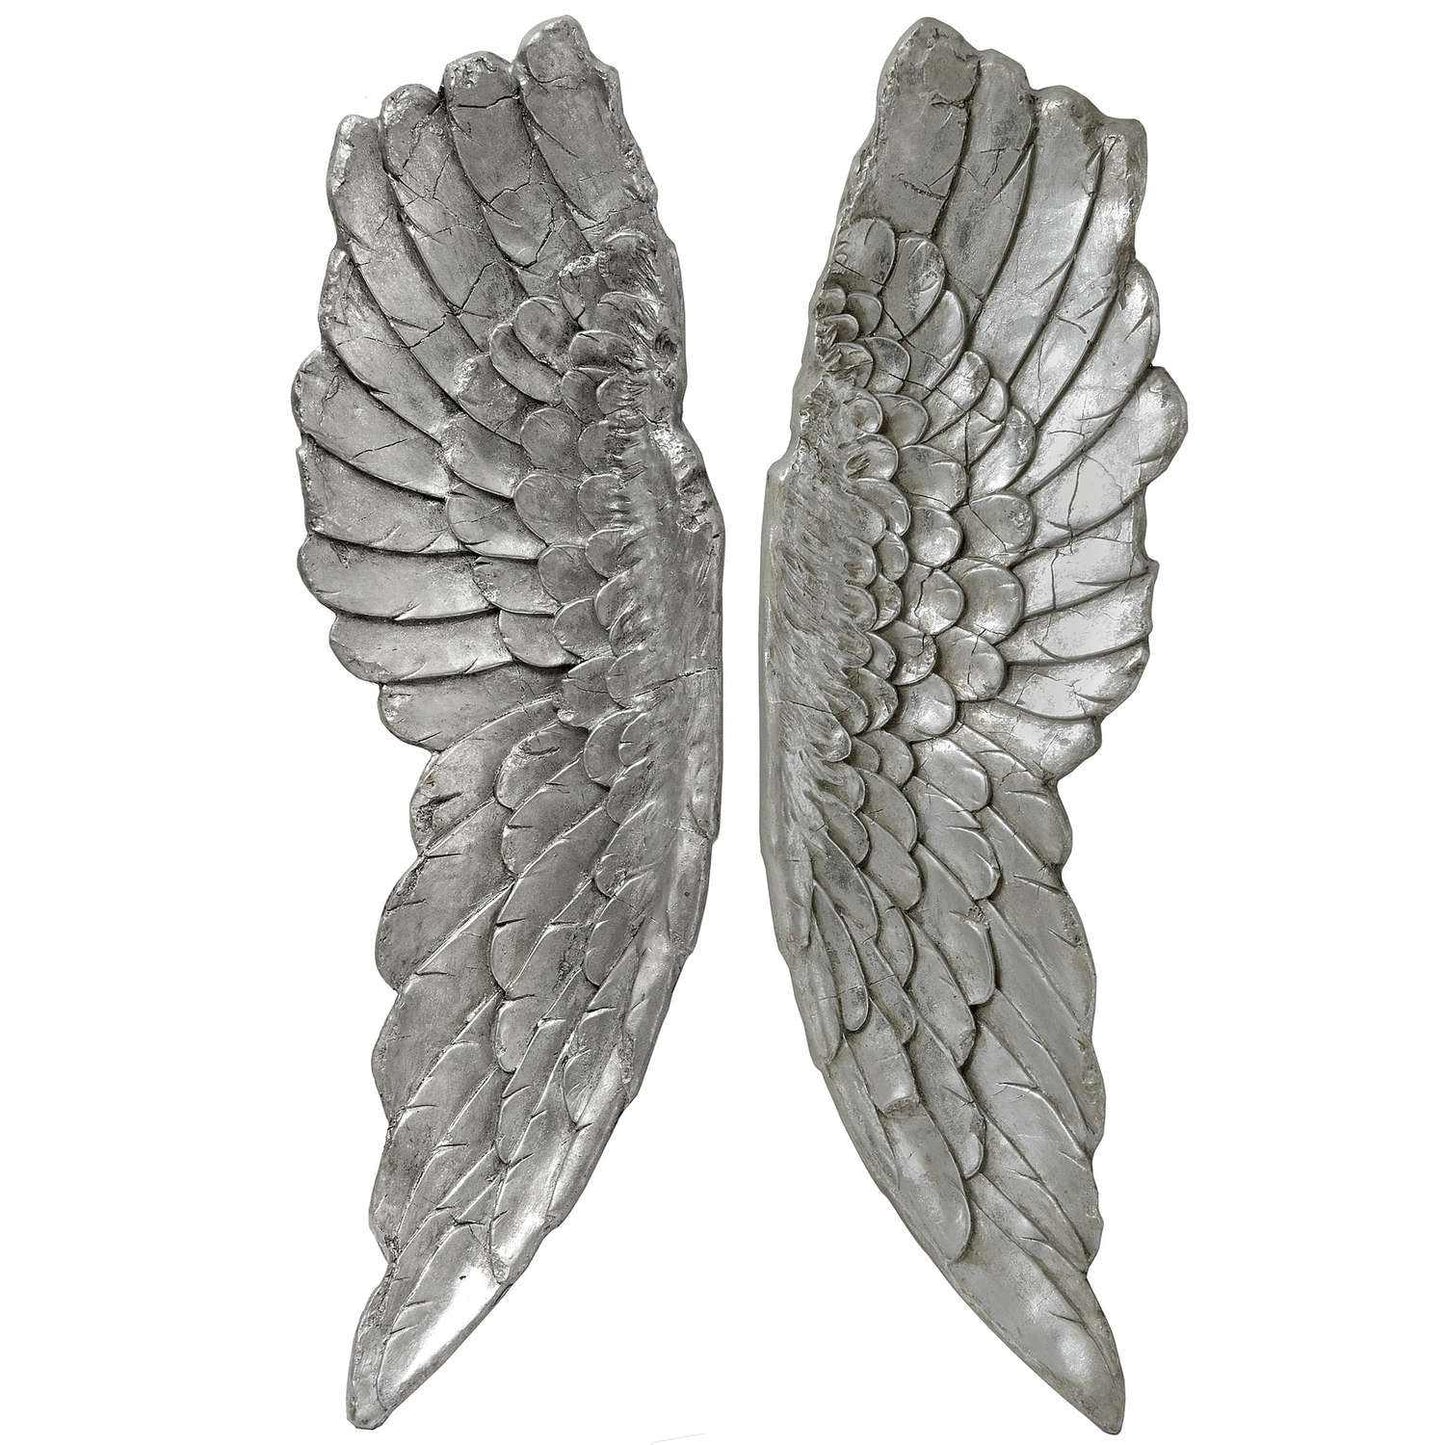 Large Antique Silver Angel Wings Wall Art